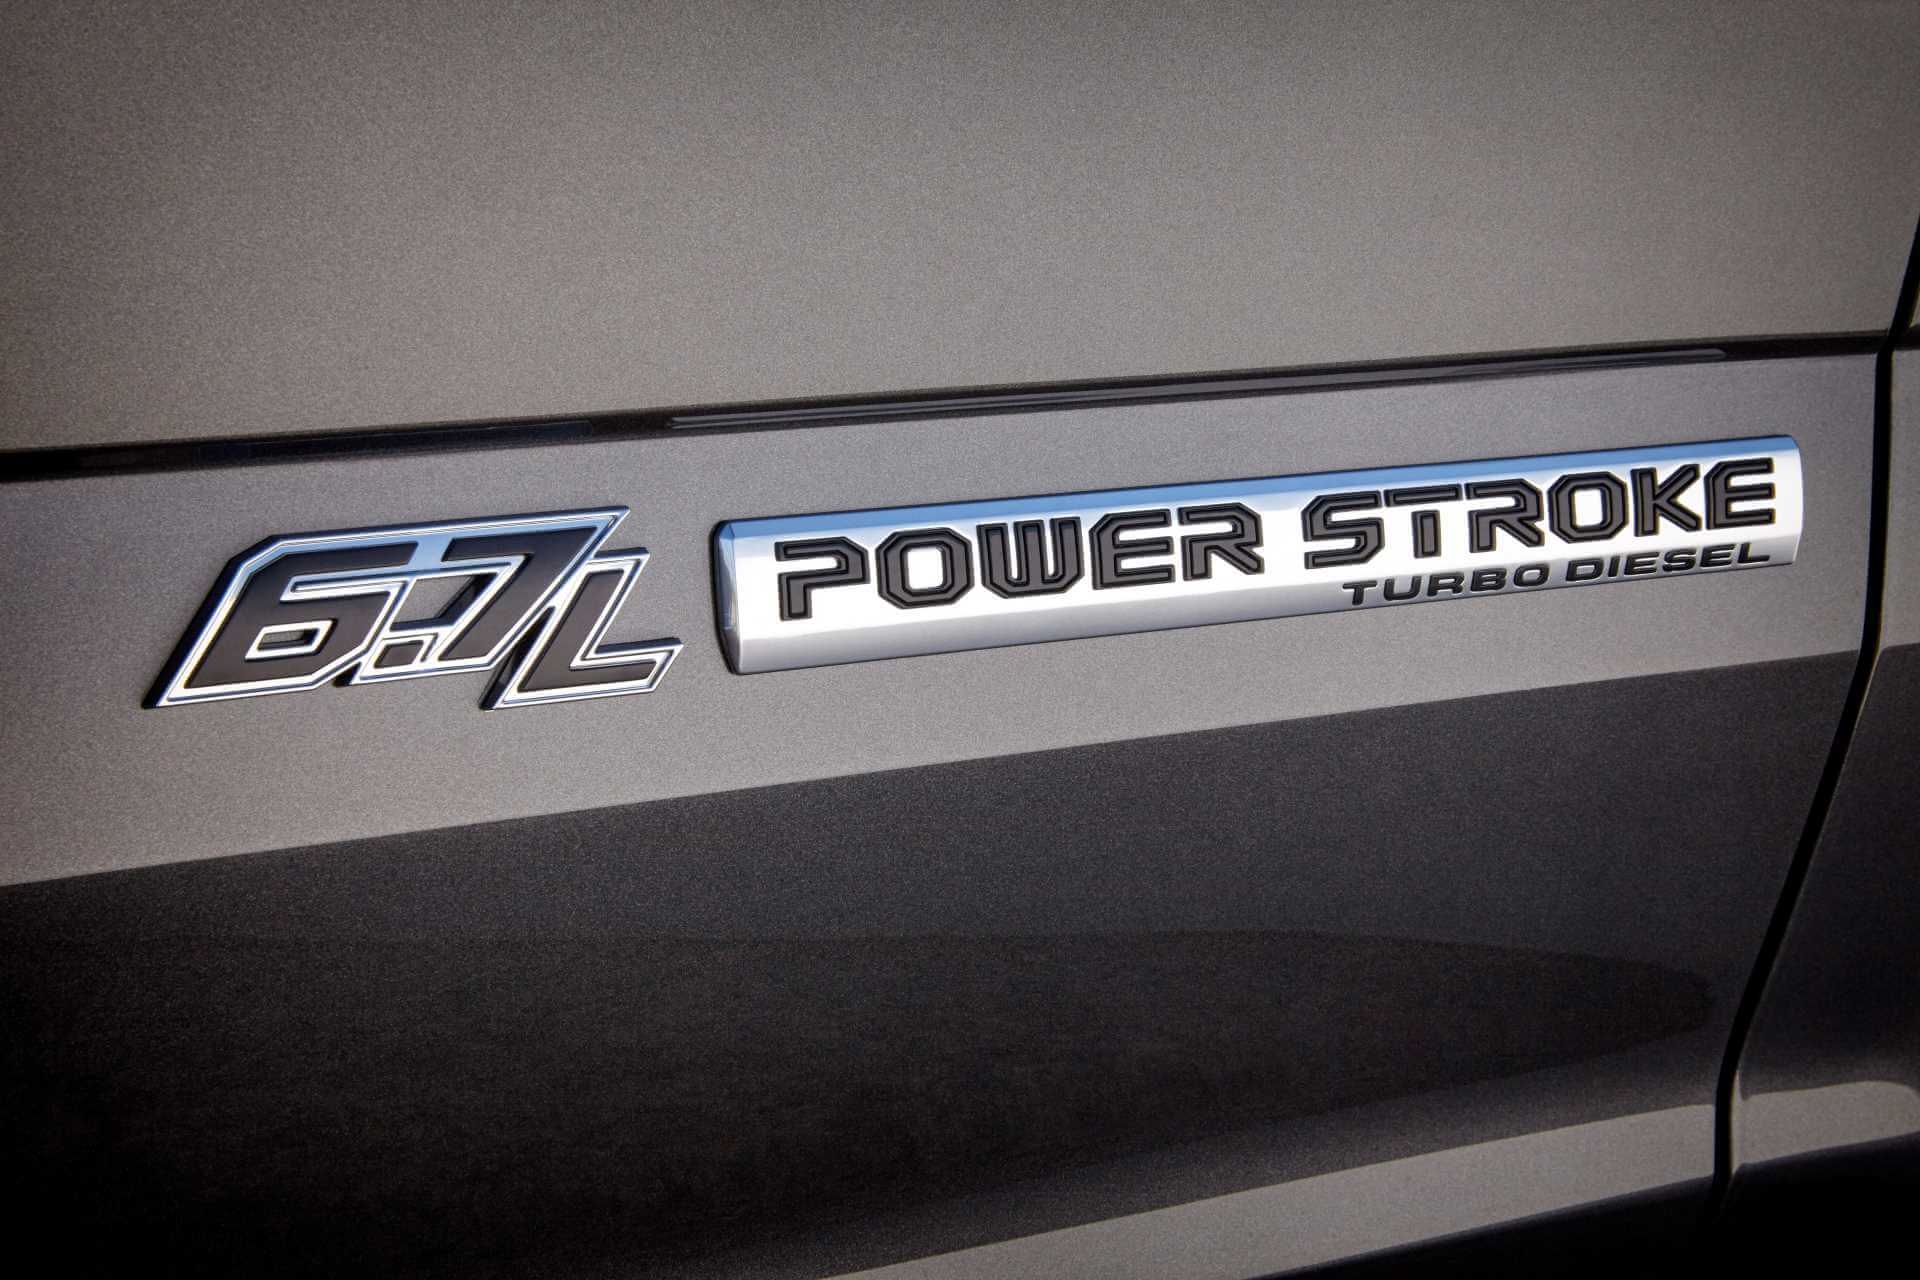 Exterior badge for the 6.7L Power Stroke Turbodiesel engine inside, upon a gray exterior vehicle